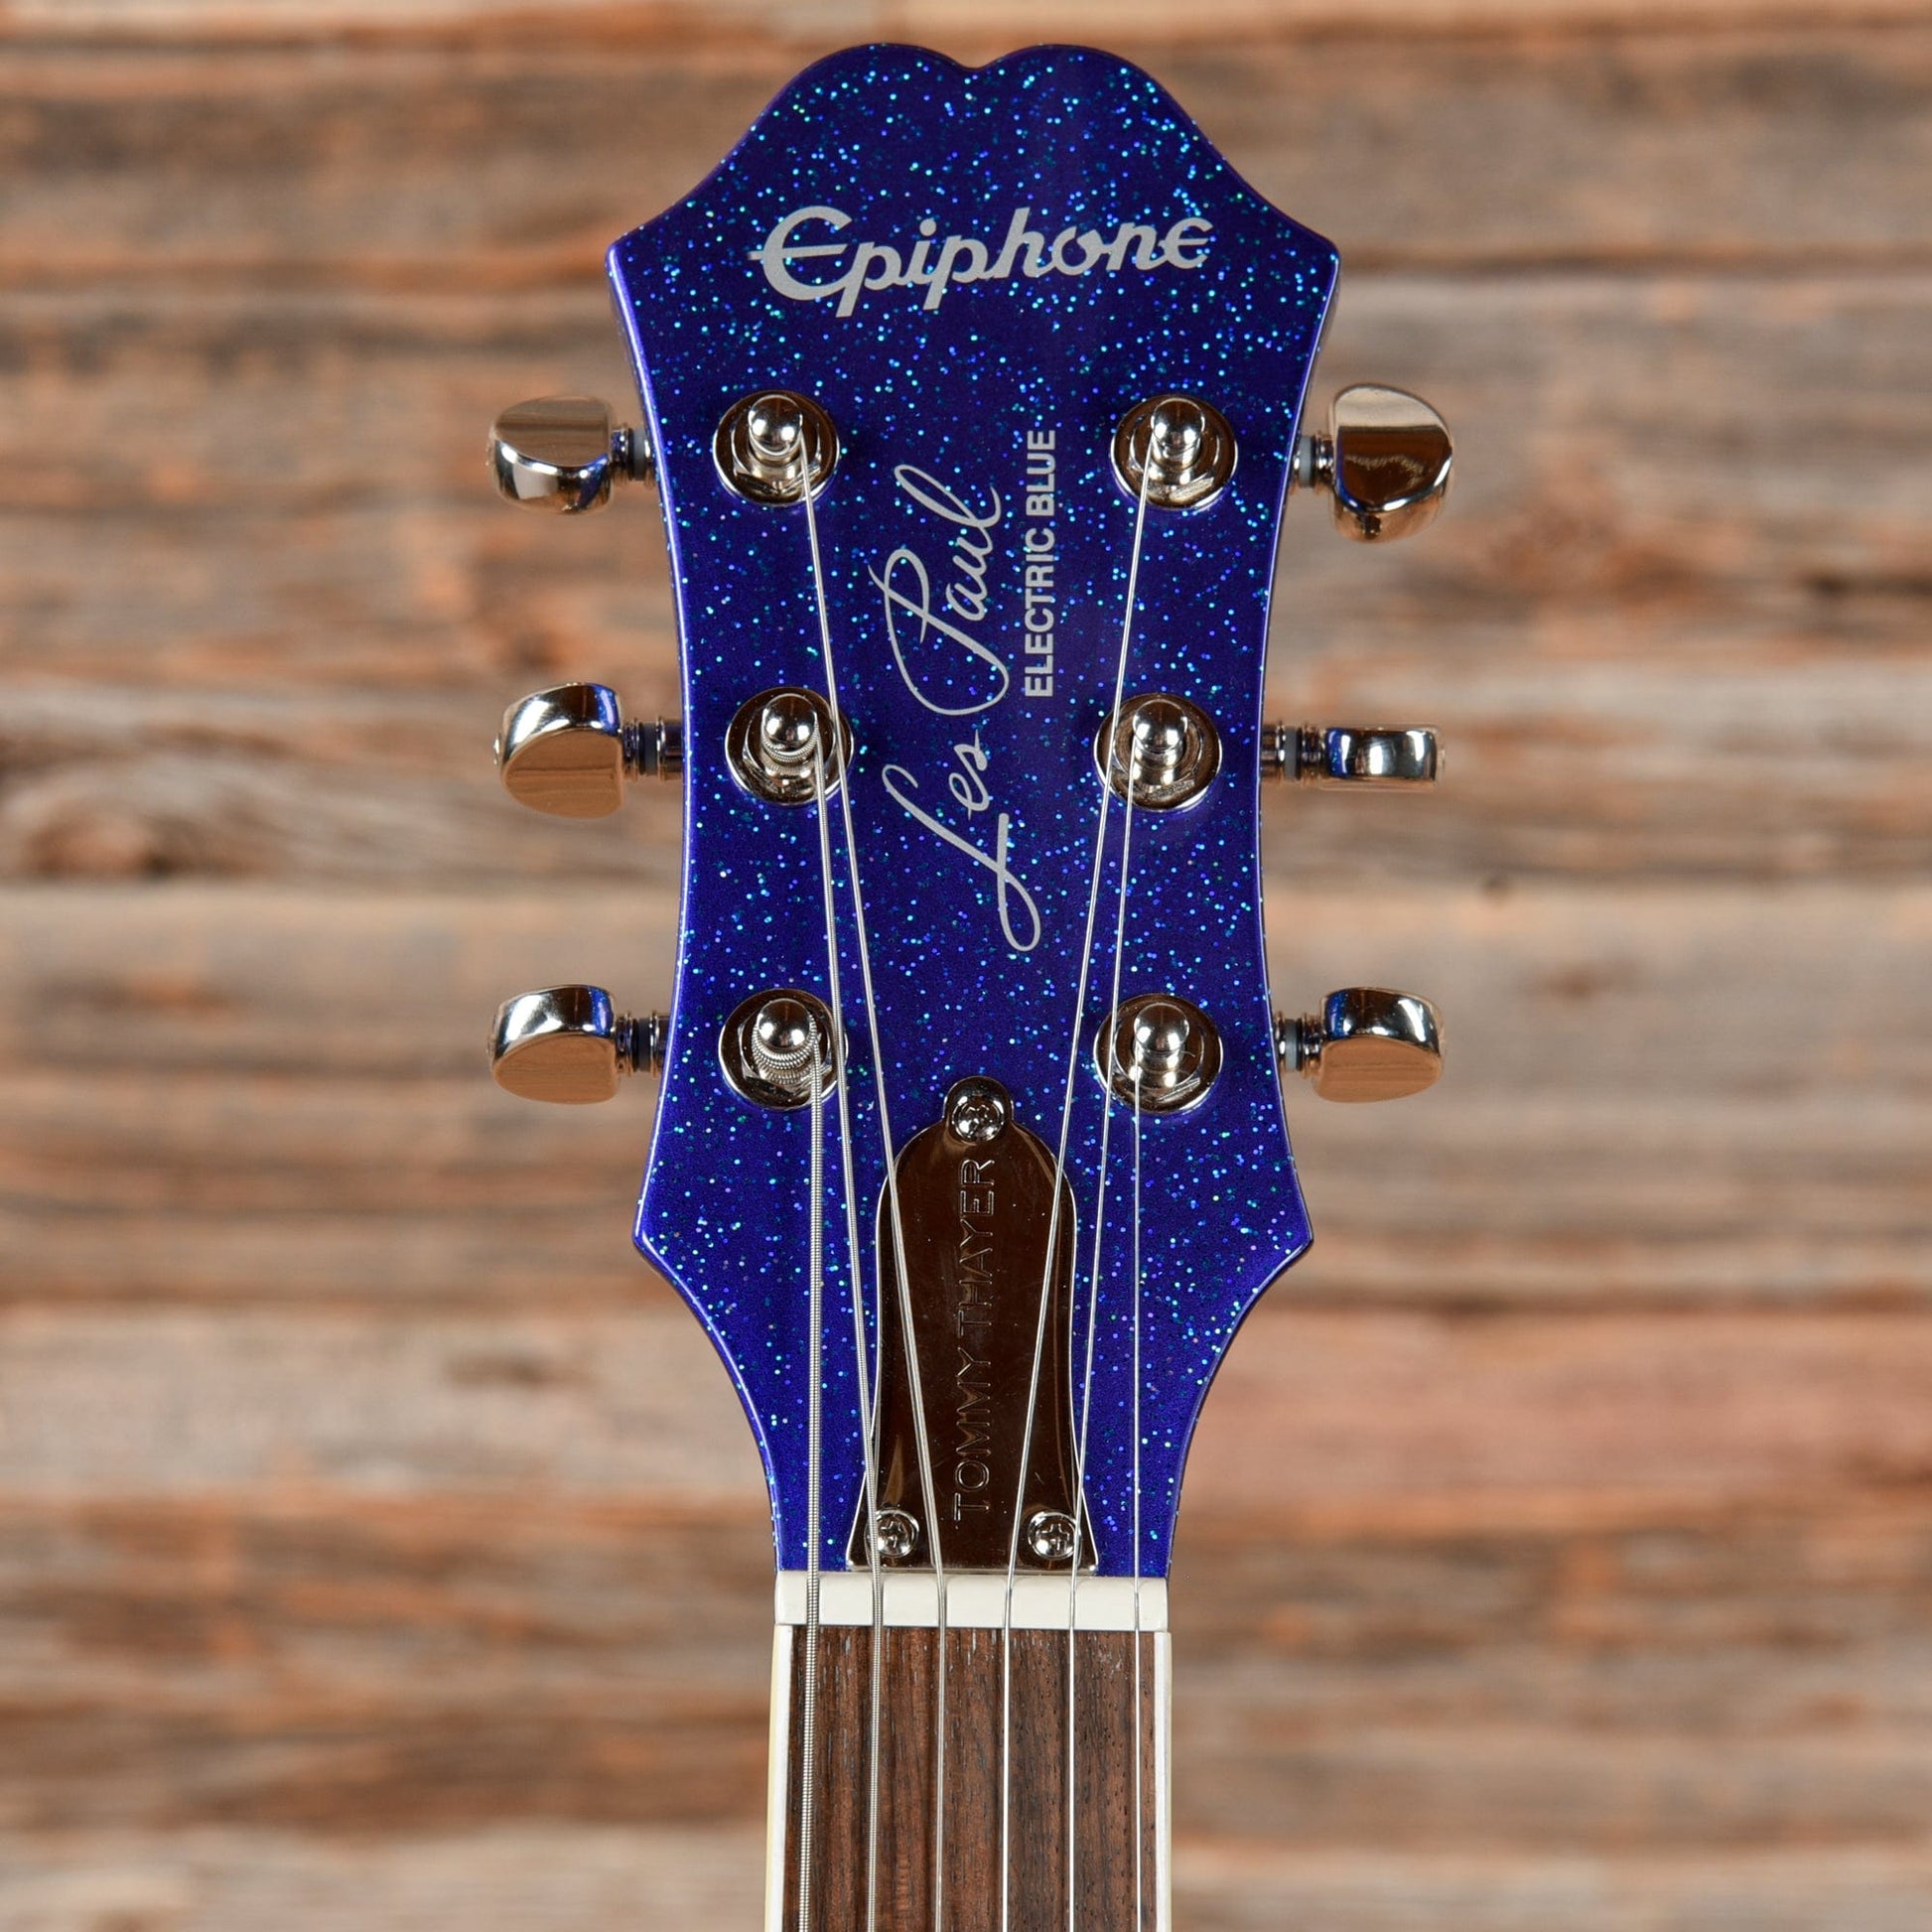 Epiphone Tommy Thayer Signature "Electric Blue" Les Paul Standard Blue Sparkle Electric Guitars / Solid Body